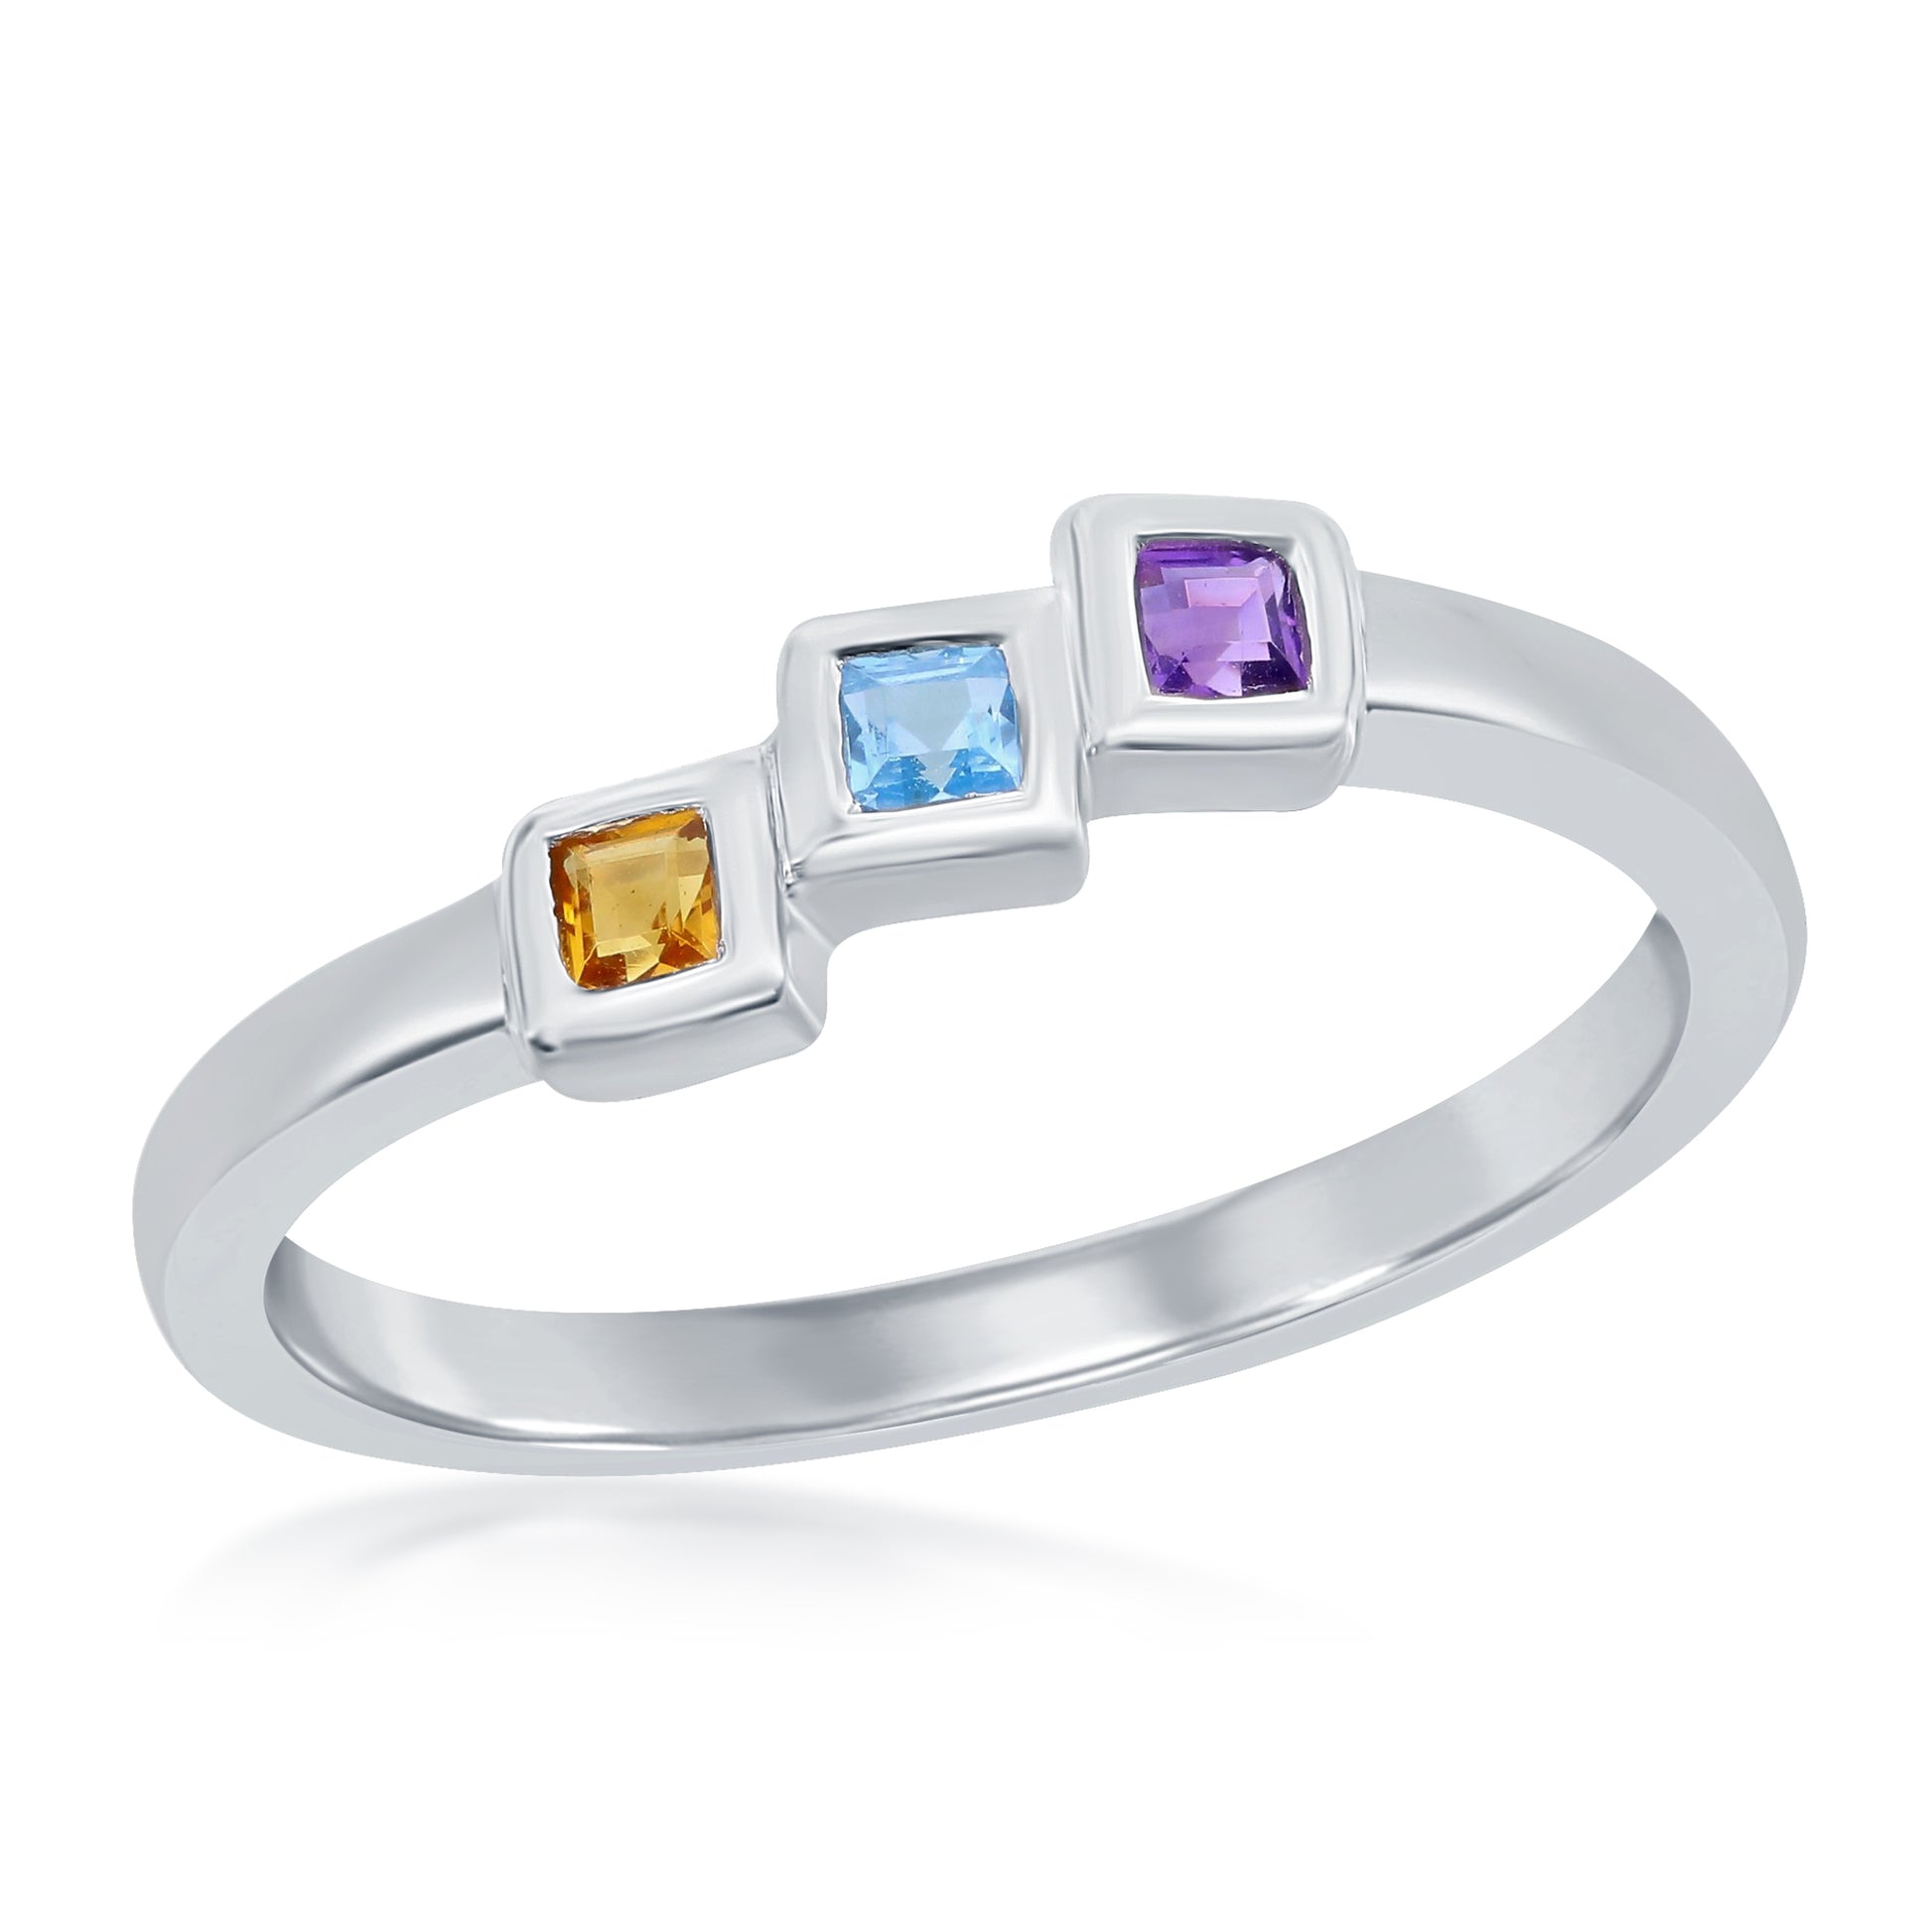 AMETHYST/CINTRINE/BLUE TOPAZ STERLING SILVER RING - Reigning Jewels Fine Jewelry 